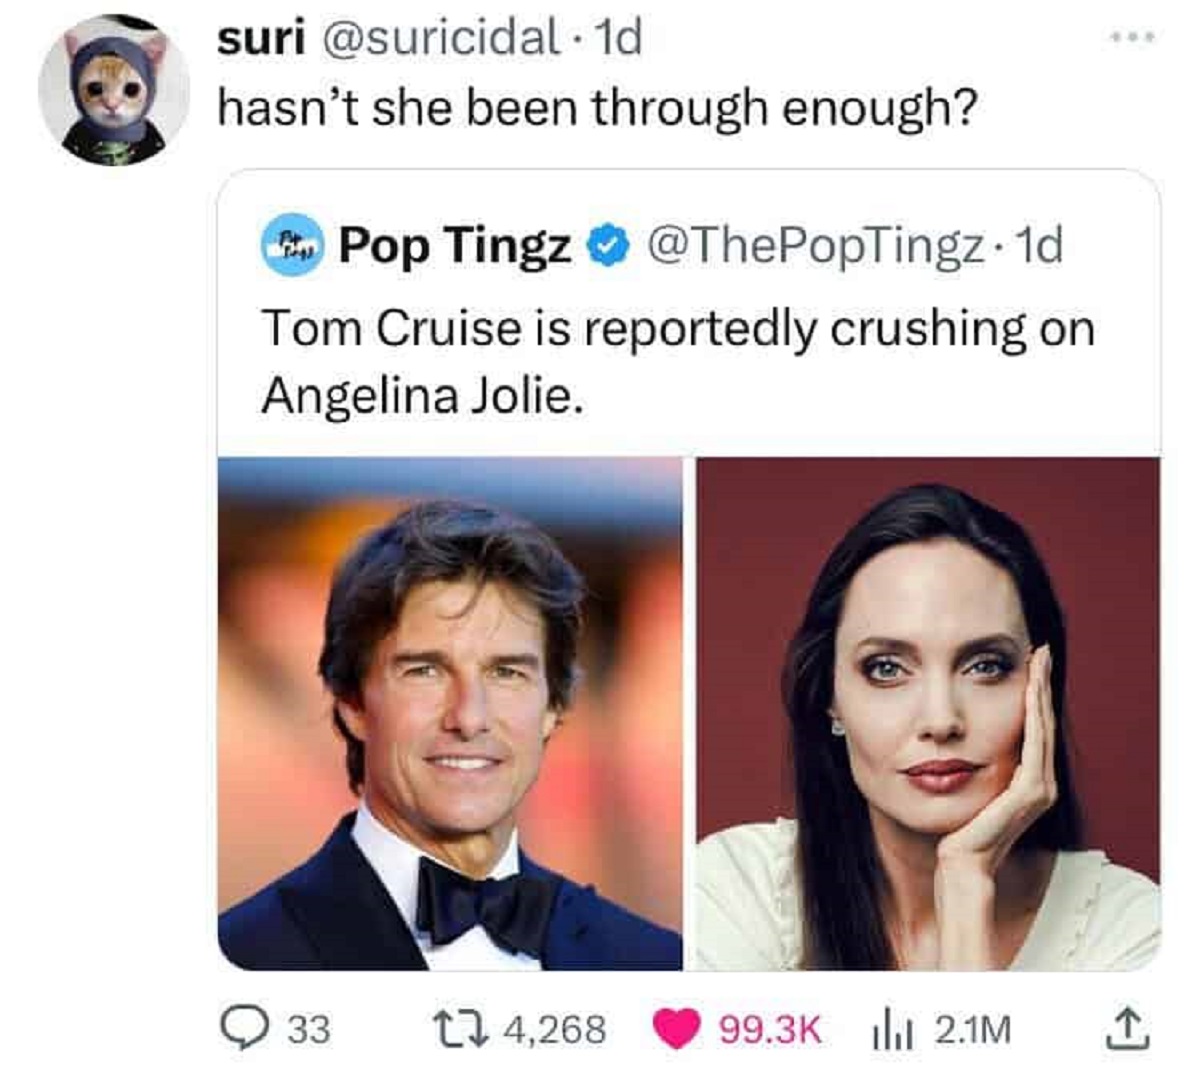 tom cruise in 2023 - suri . 1d hasn't she been through enough? Pop Tingz . 1d Tom Cruise is reportedly crushing on Angelina Jolie. 33 4,268 2.1M